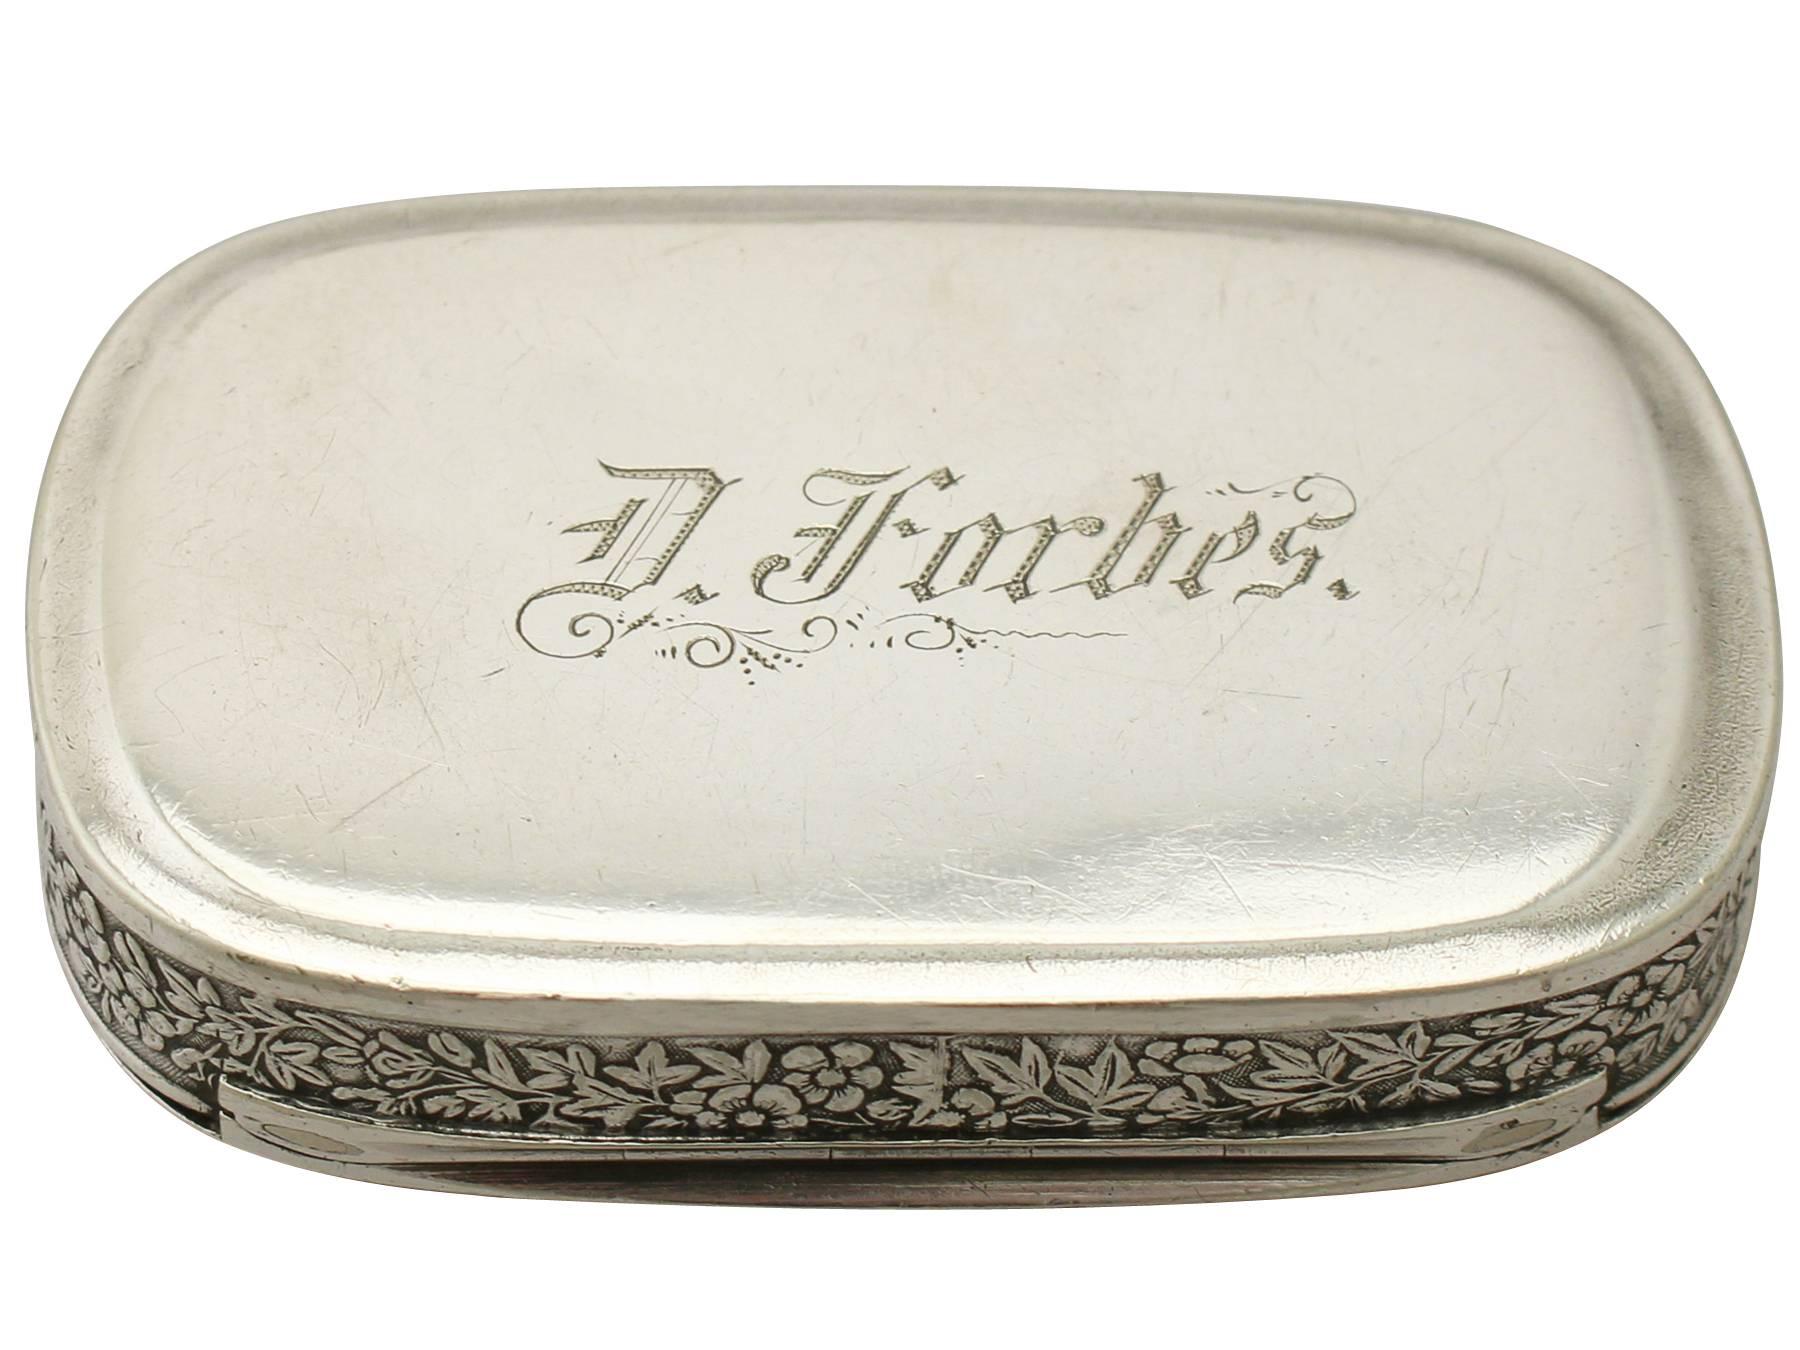 An exceptional, fine and impressive antique American sterling silver snuff box; an addition to our silver box and cases collection.

This exceptional antique American sterling silver snuff box has a rectangular form with rounded corners.

The